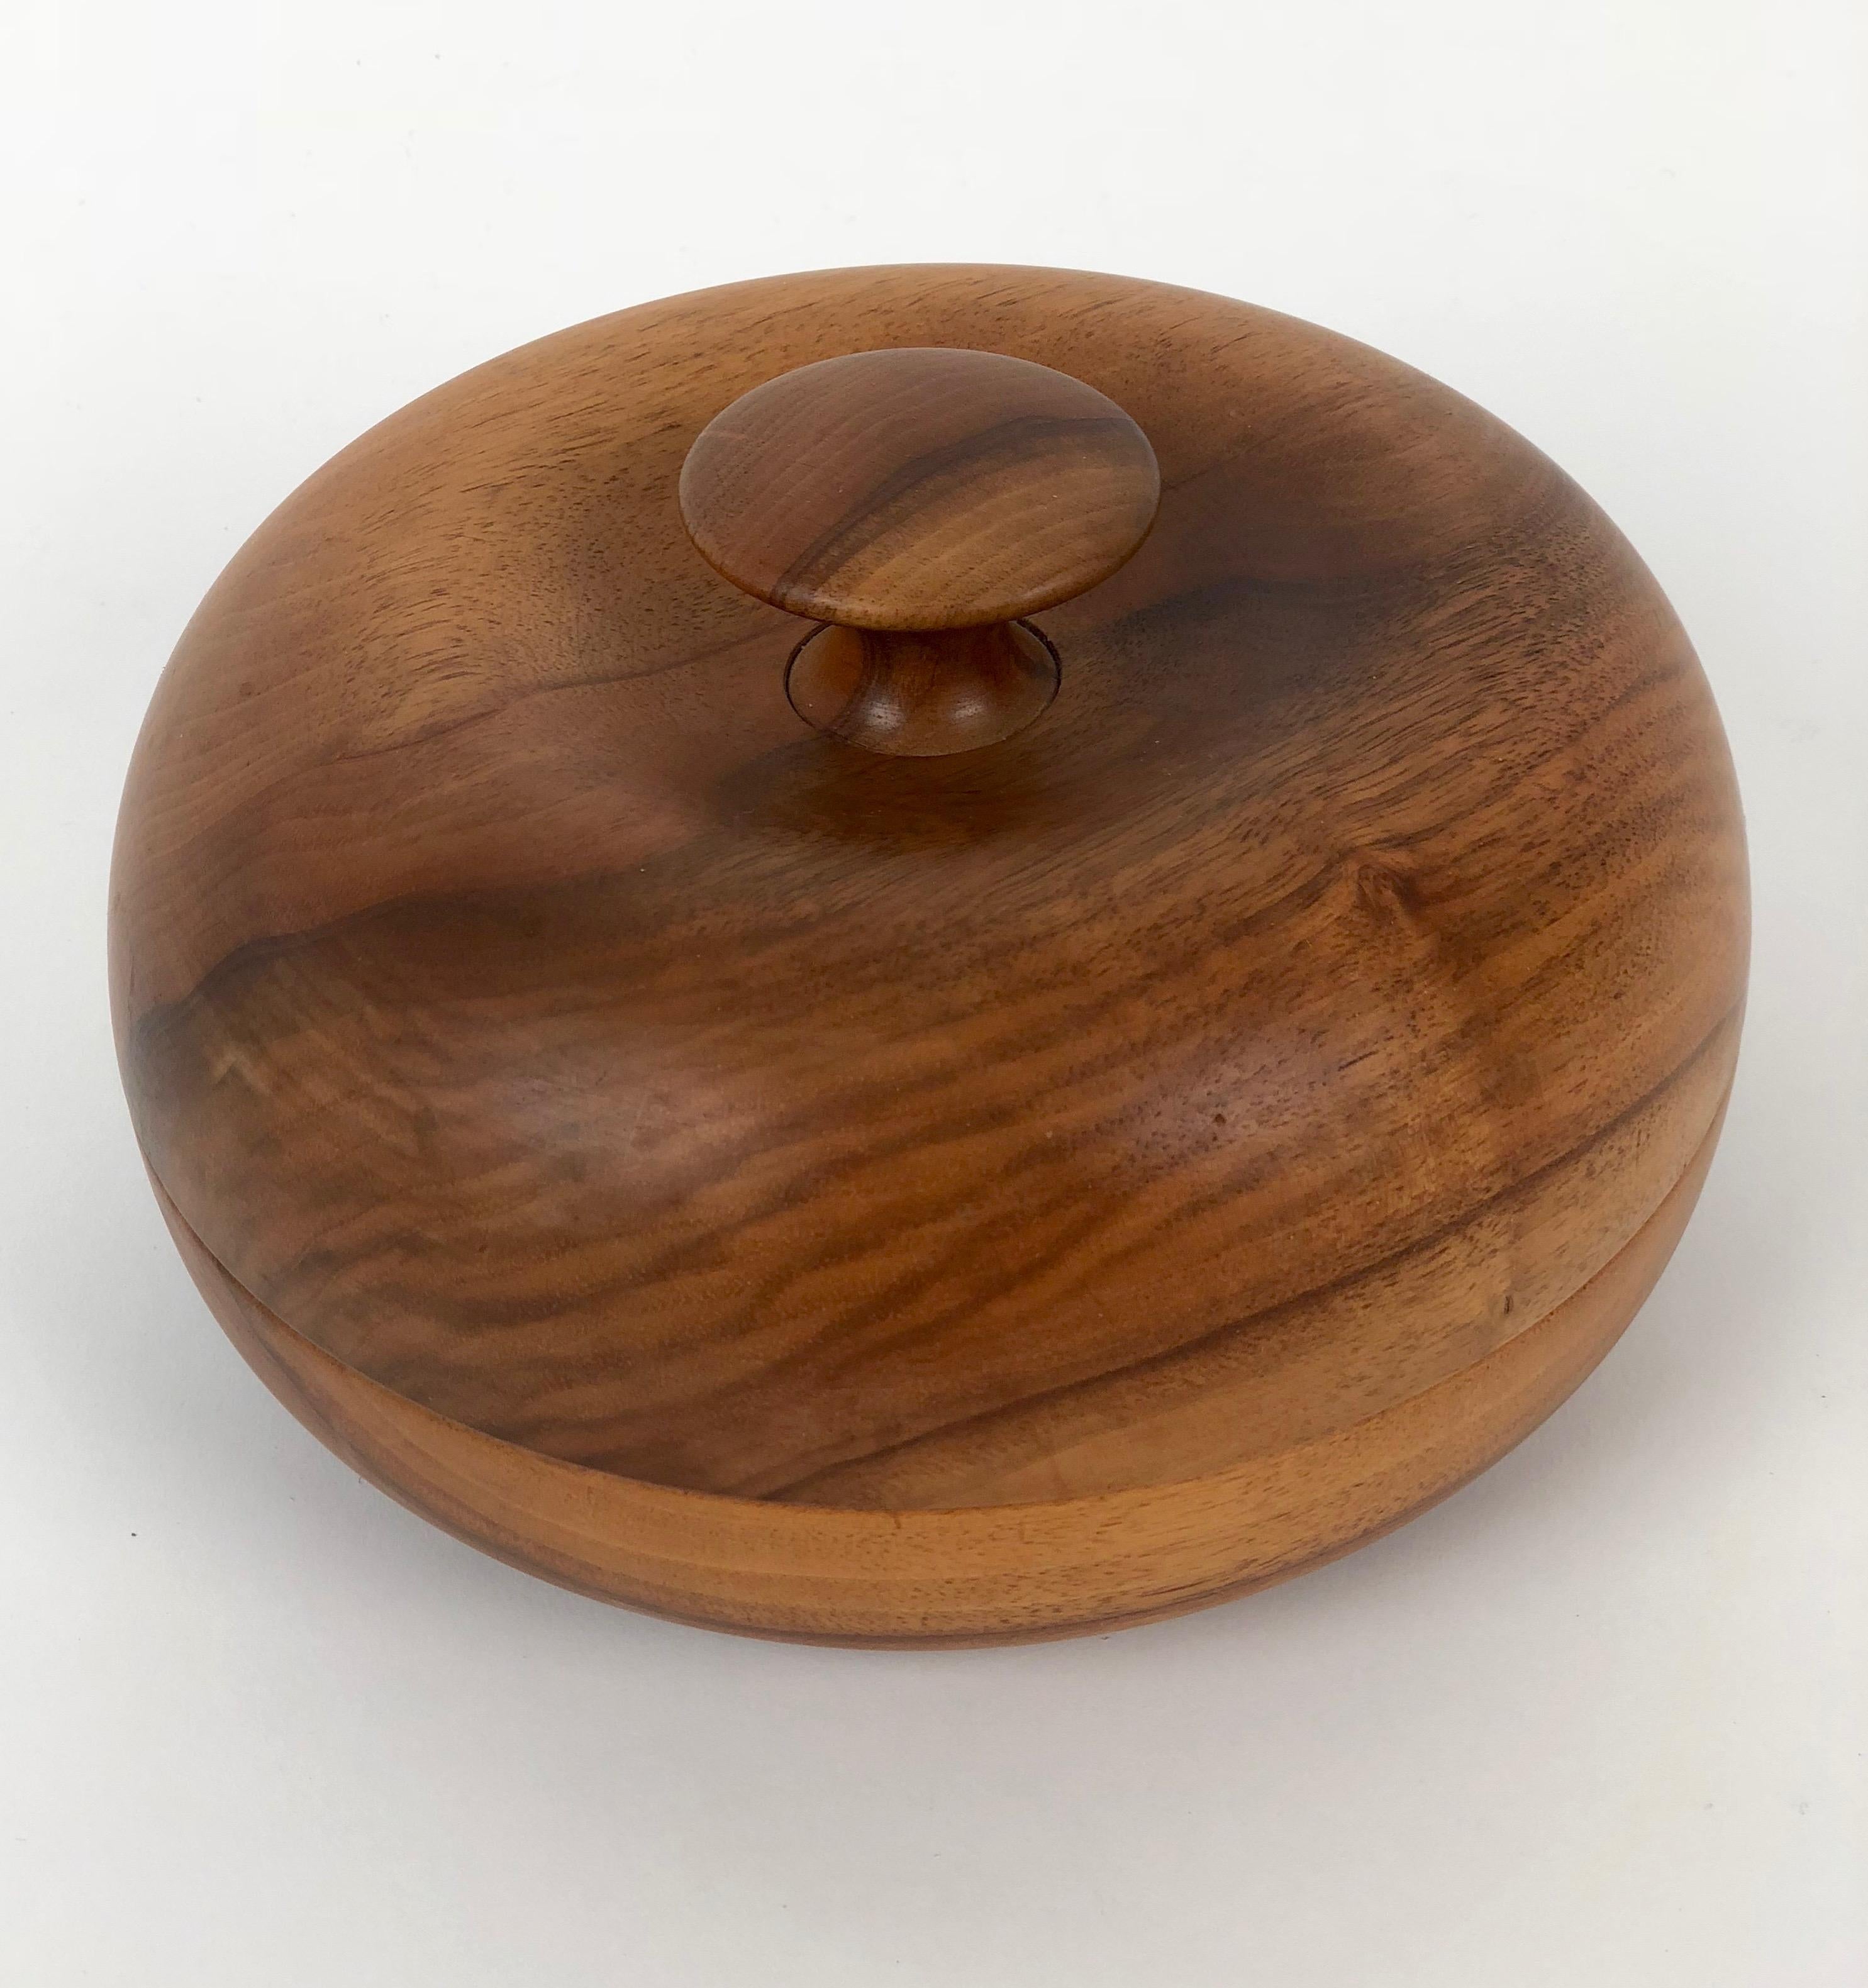 A beautiful mid-century bowl with top made from turned walnut. This complex design is made to perfection. Take your time to explore the photos and discover all the various aspects of the work and how they harmonise.